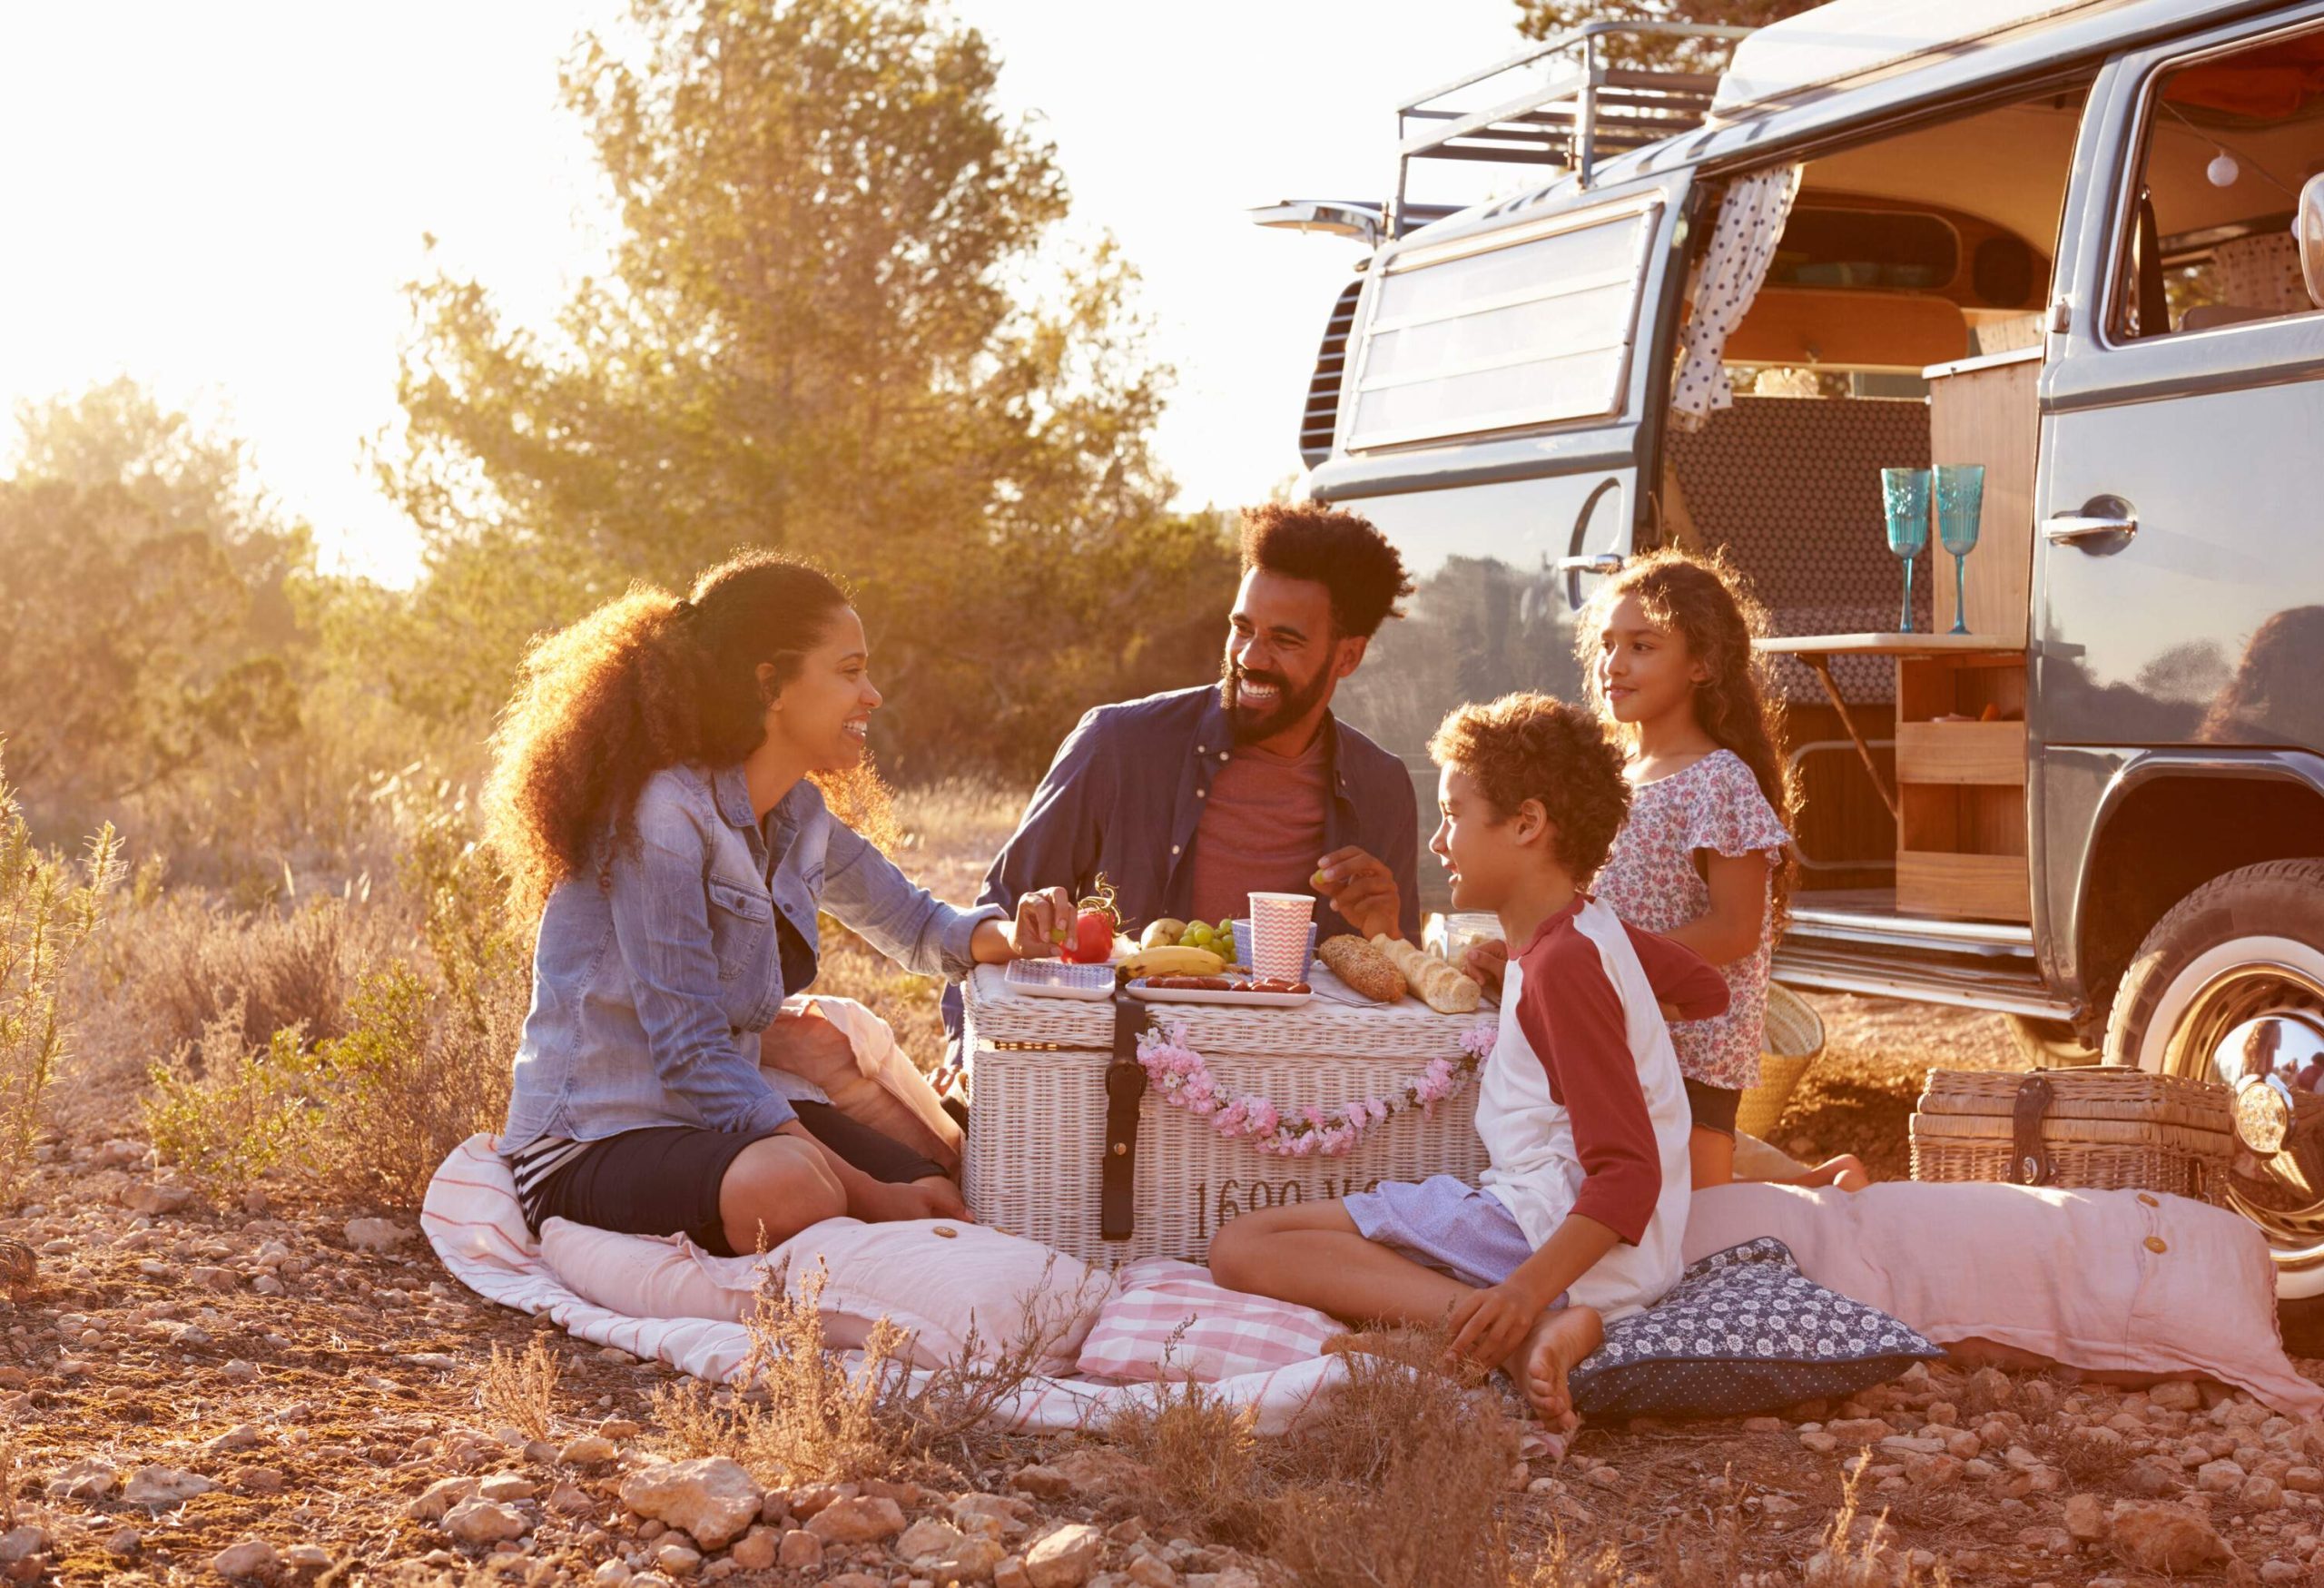 A joyful family of four enjoys a lunch outside next to their camper van.